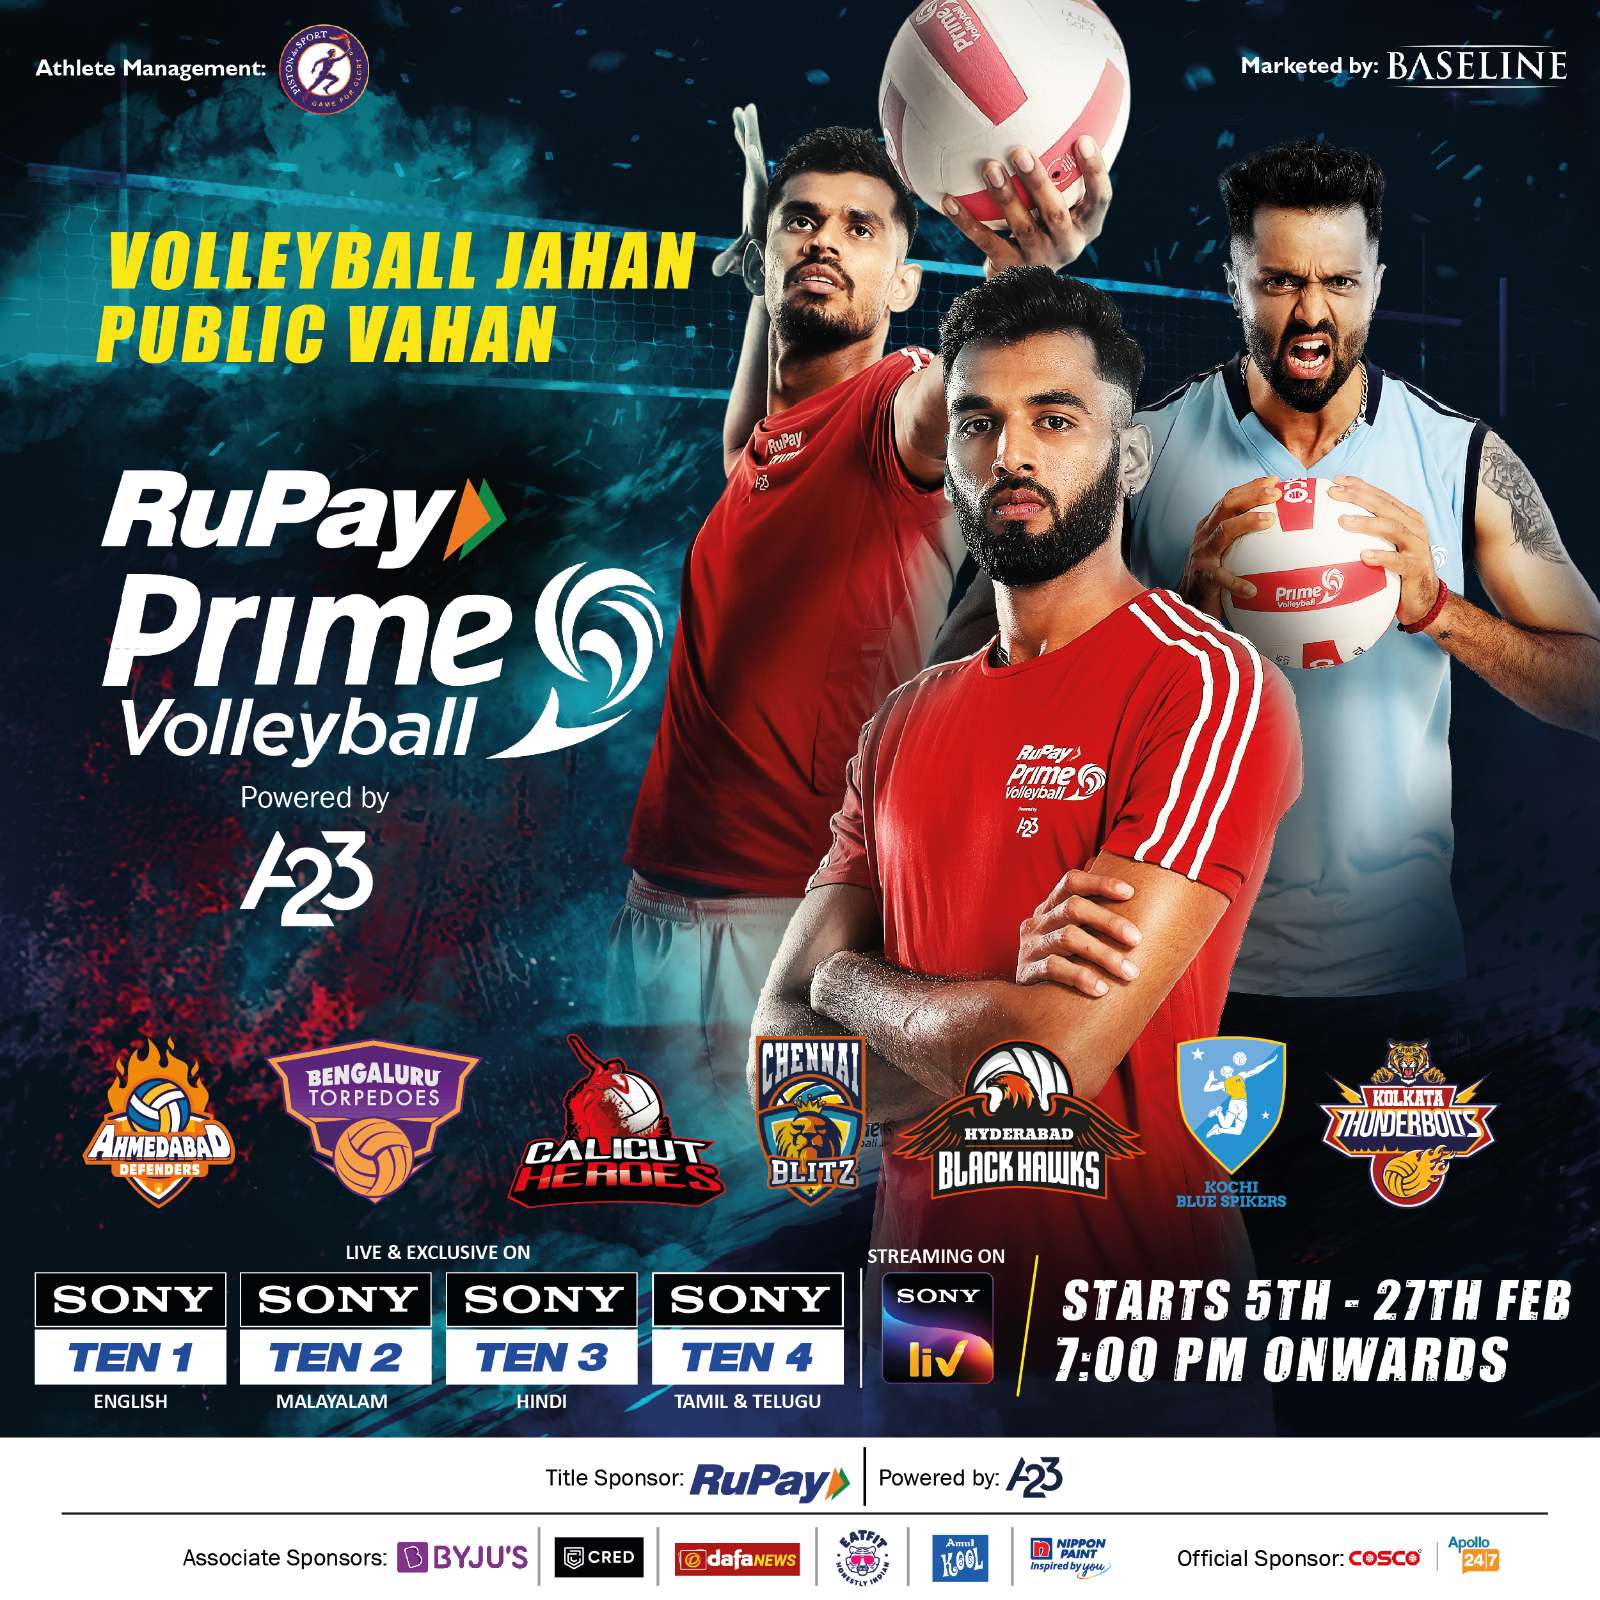 PVL 2022 LIVE Streaming With 13 sponsors signed, Sony Sports and SonyLIV ready for MEGA-BROADCAST of Prime Volleyball League starting today Follow PVL LIVE Updates